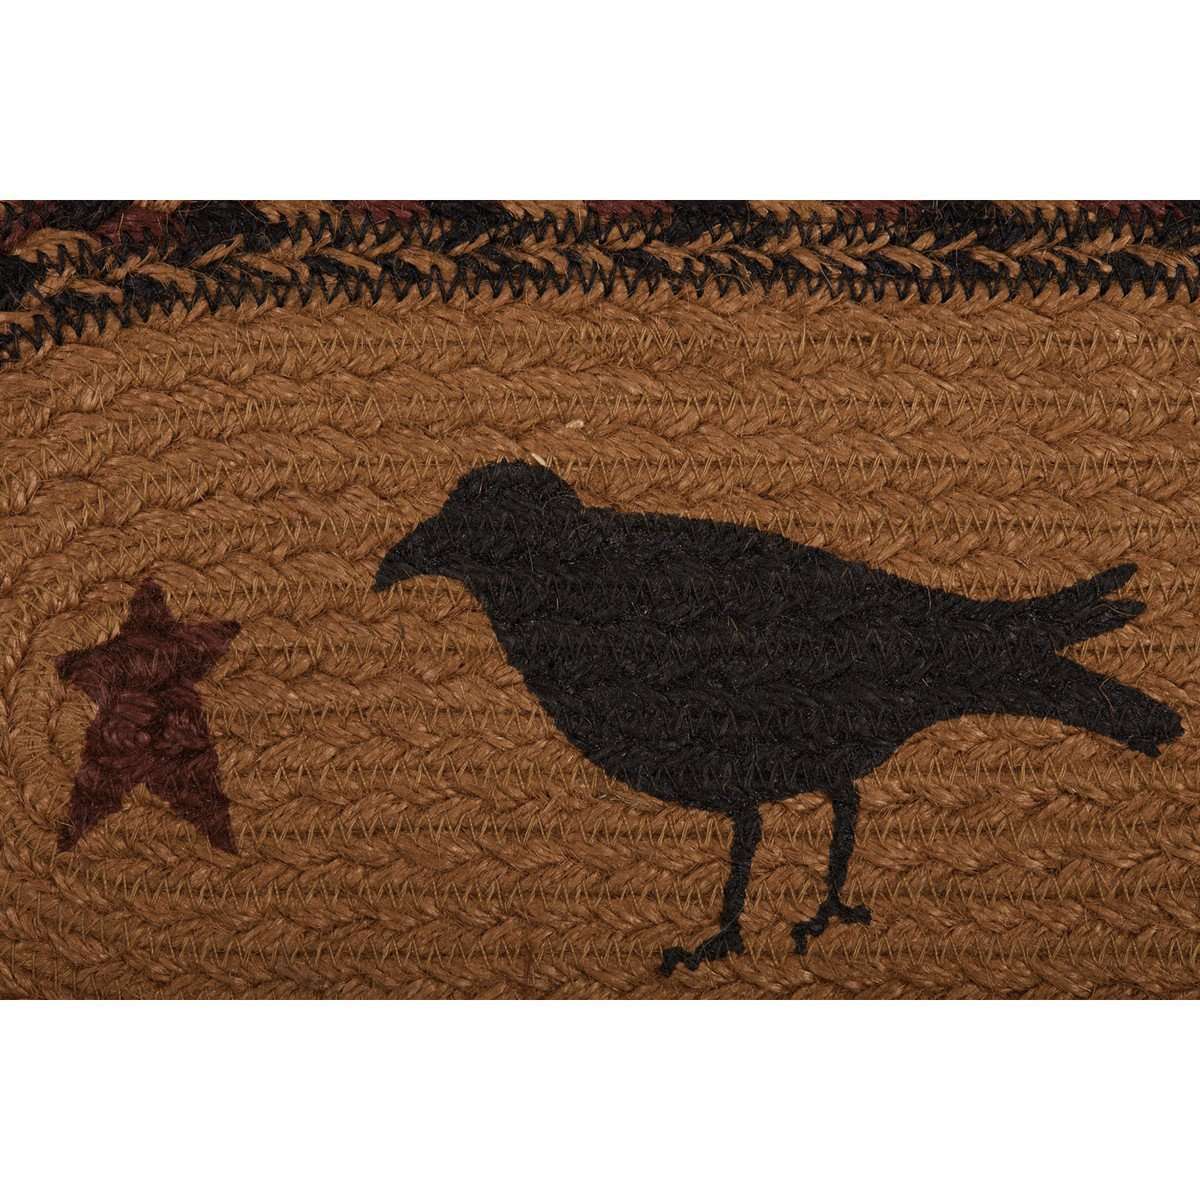 Heritage Farms Crow Jute Braided Placemat Set of 6 VHC Brands - The Fox Decor